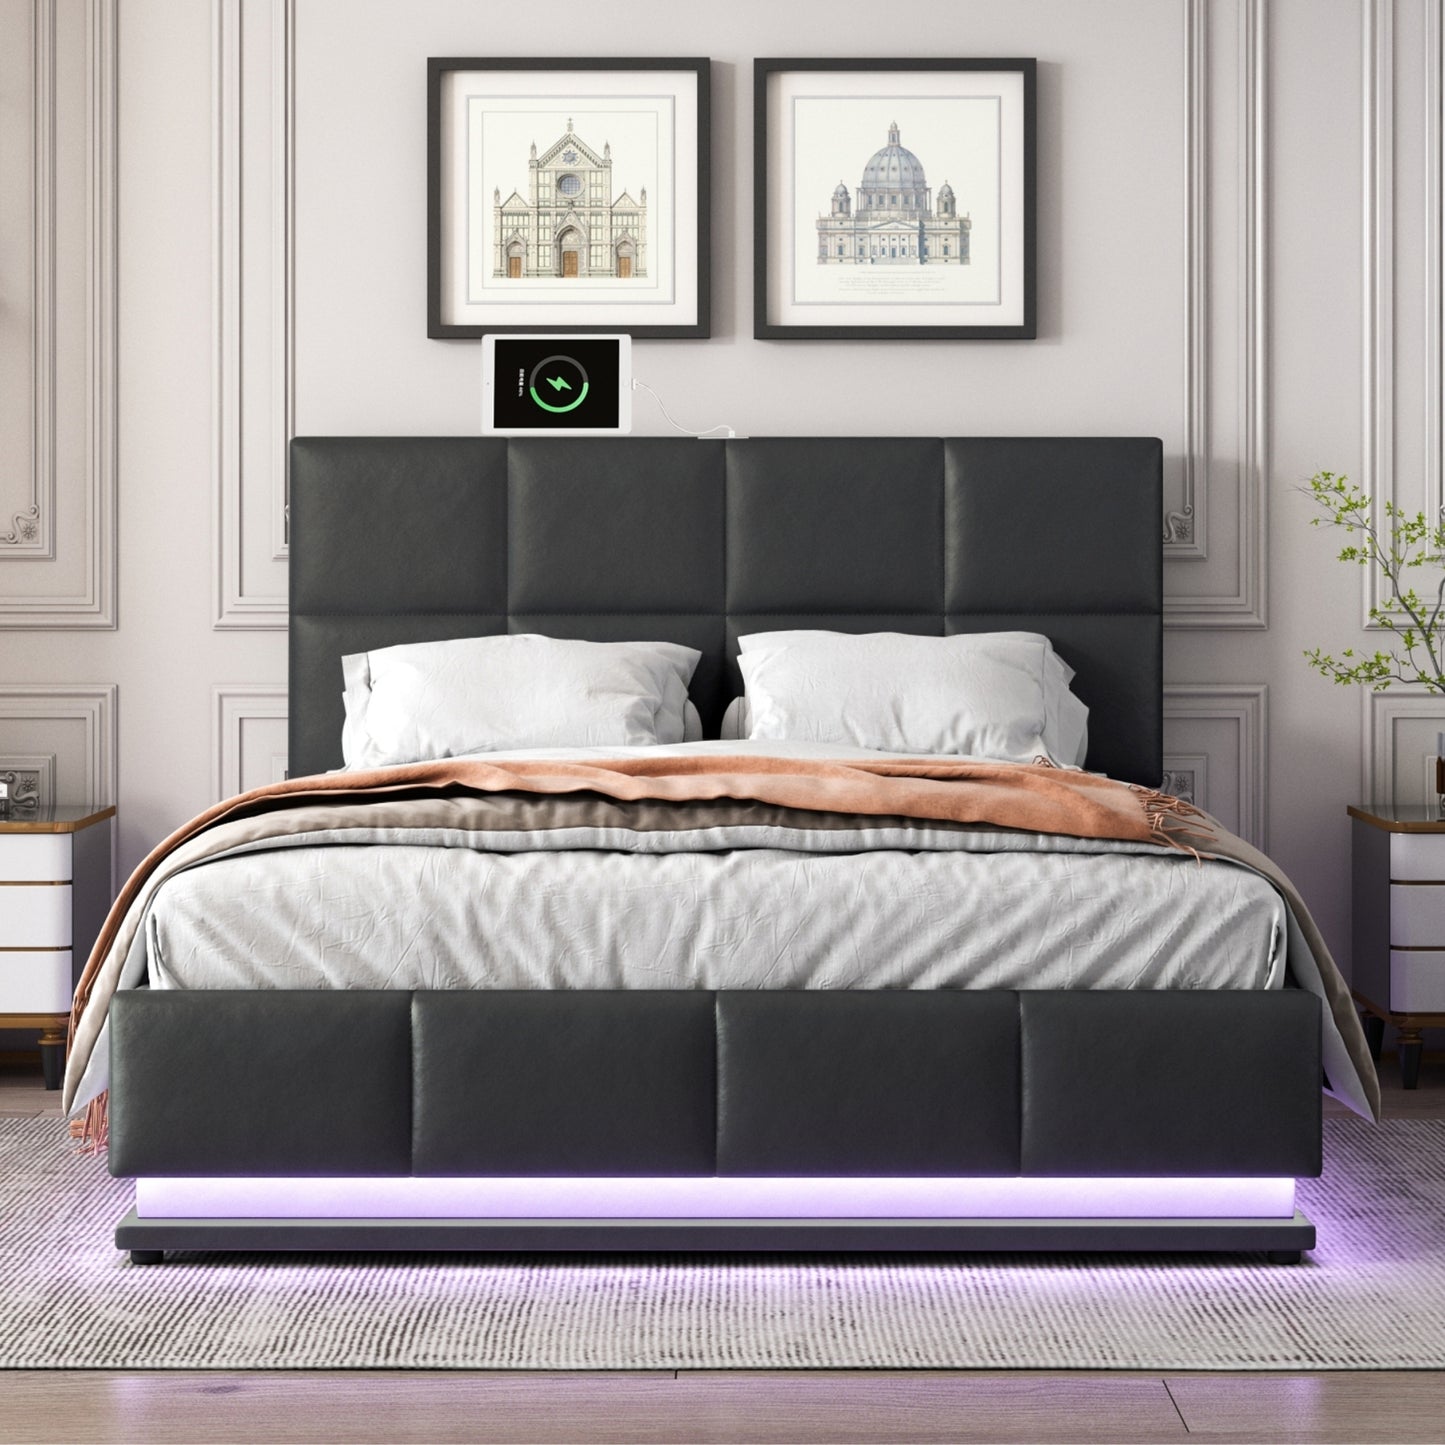 Tufted Upholstered Platform Bed with Hydraulic Storage System,Queen Size PU Storage Bed with LED Lights and USB charger, Black